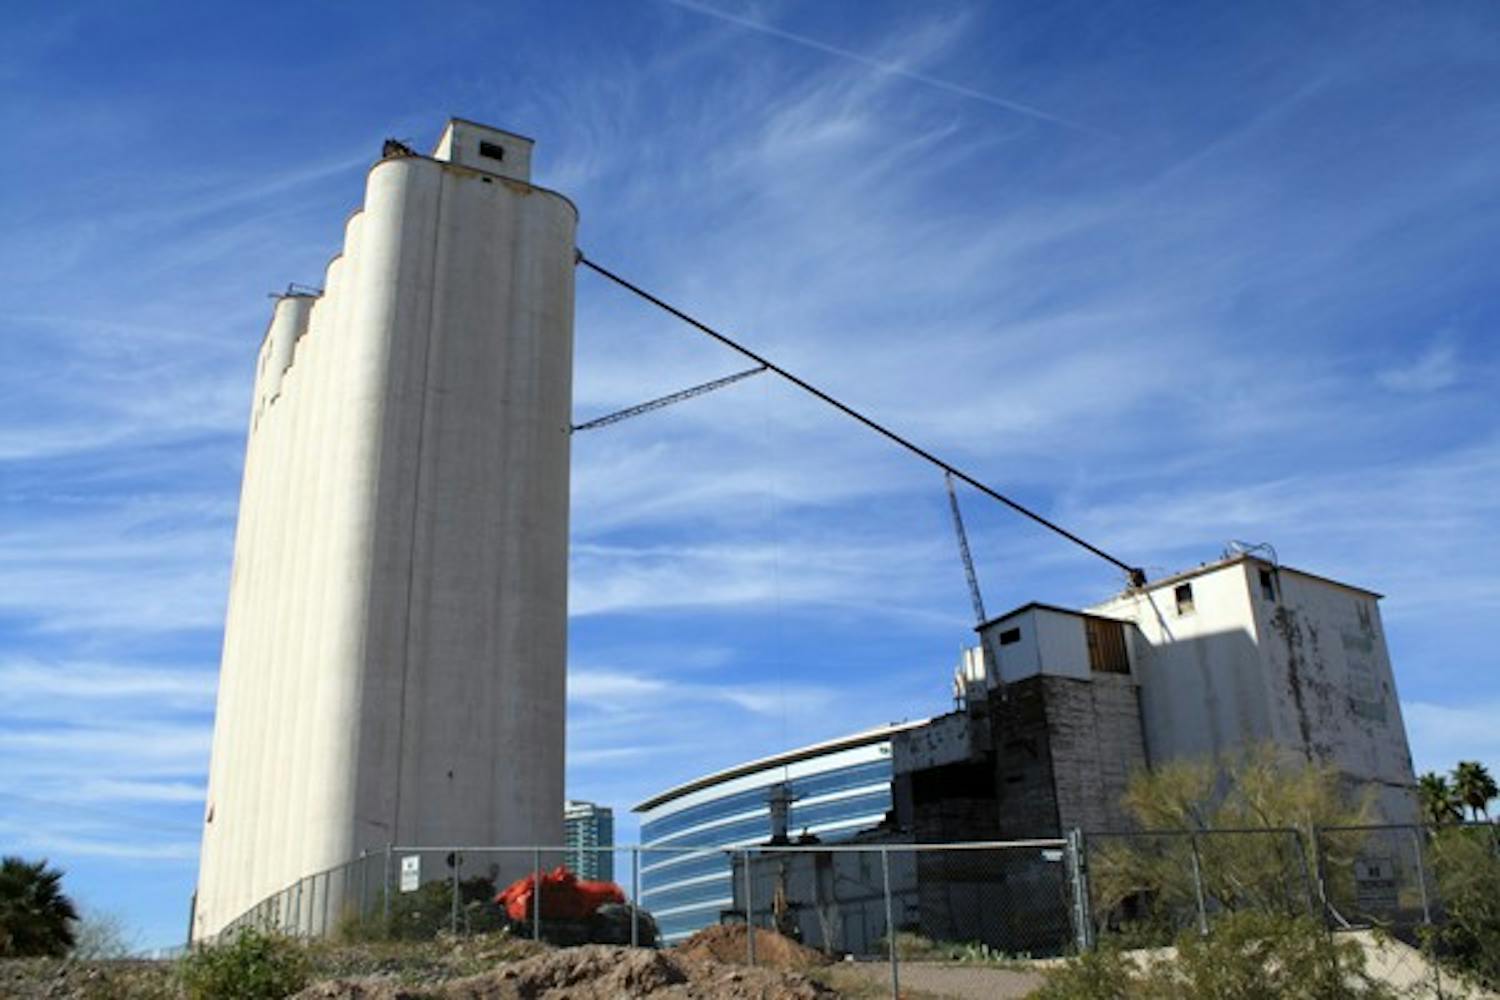 Hayden Flour Mill on Mill Avenue and Rio Salado Parkway stands as one of the oldest buildings in Tempe. The city is working to restore the mill as an event venue and plans to debut the renovations April 25. (Photo by Jessie Wardarski)